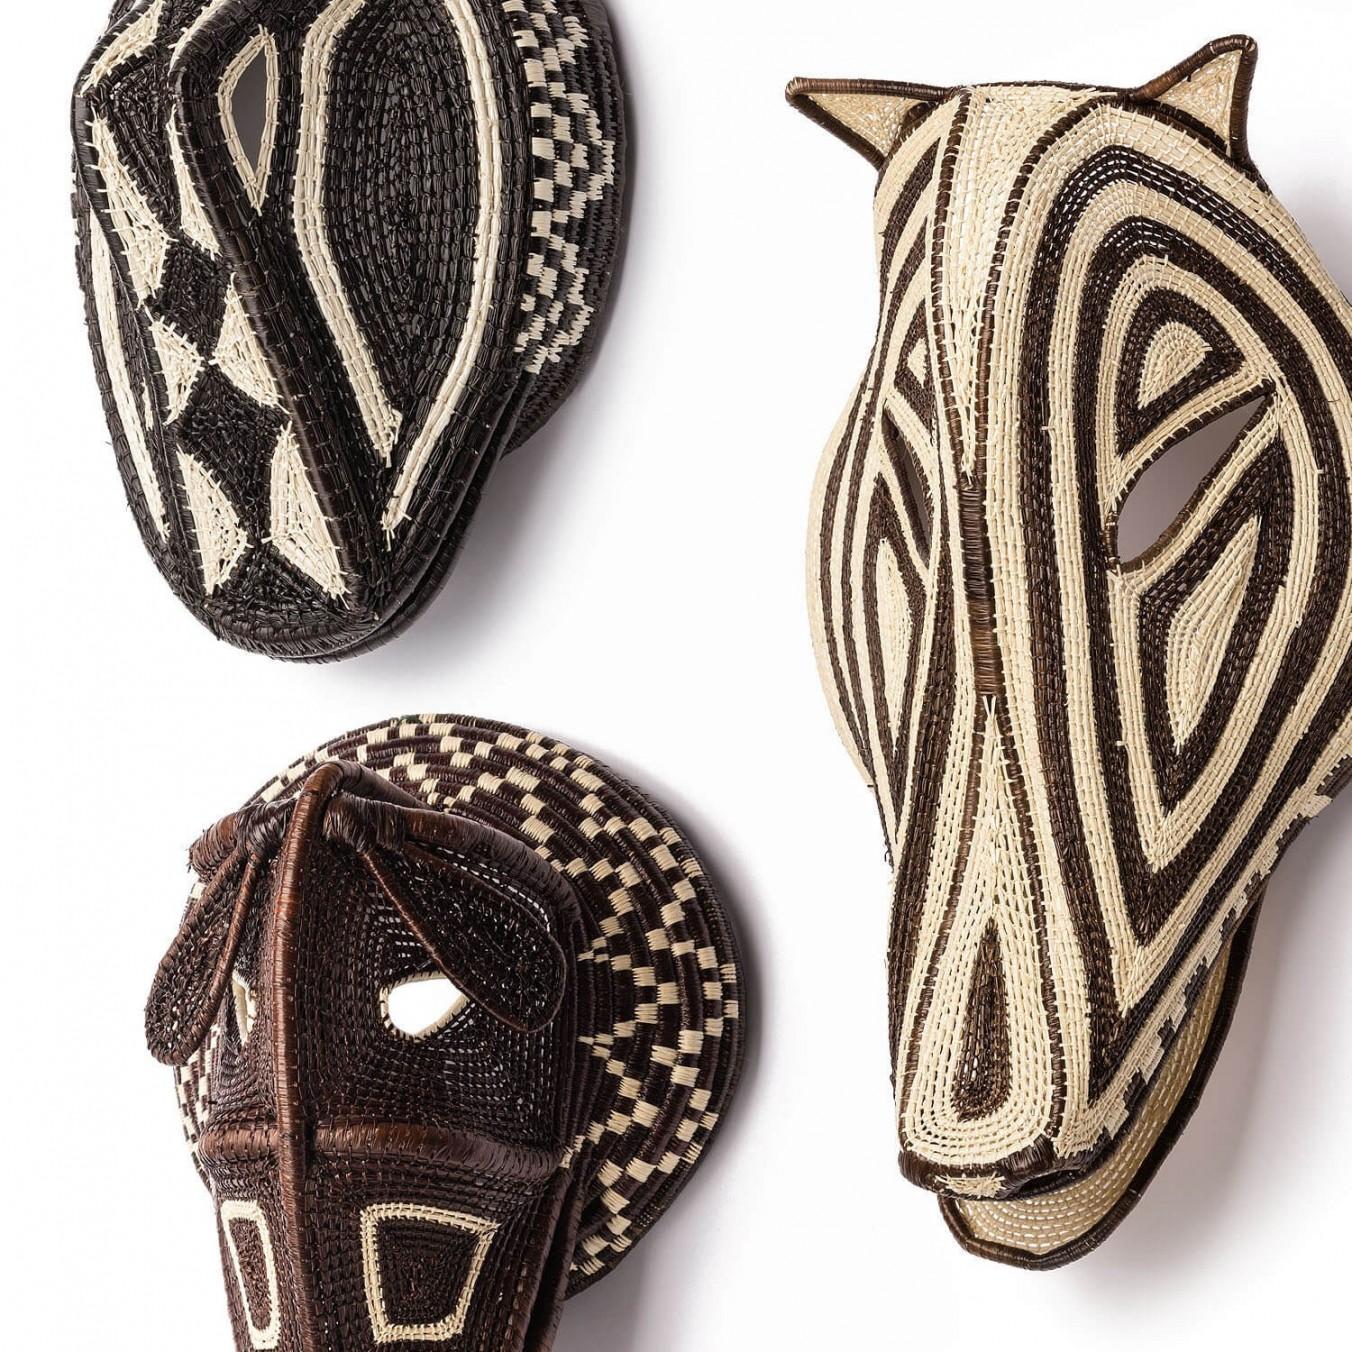 Contemporary Decorative hand-woven mask from Panama, Nemboro by Ethic&Tropic For Sale